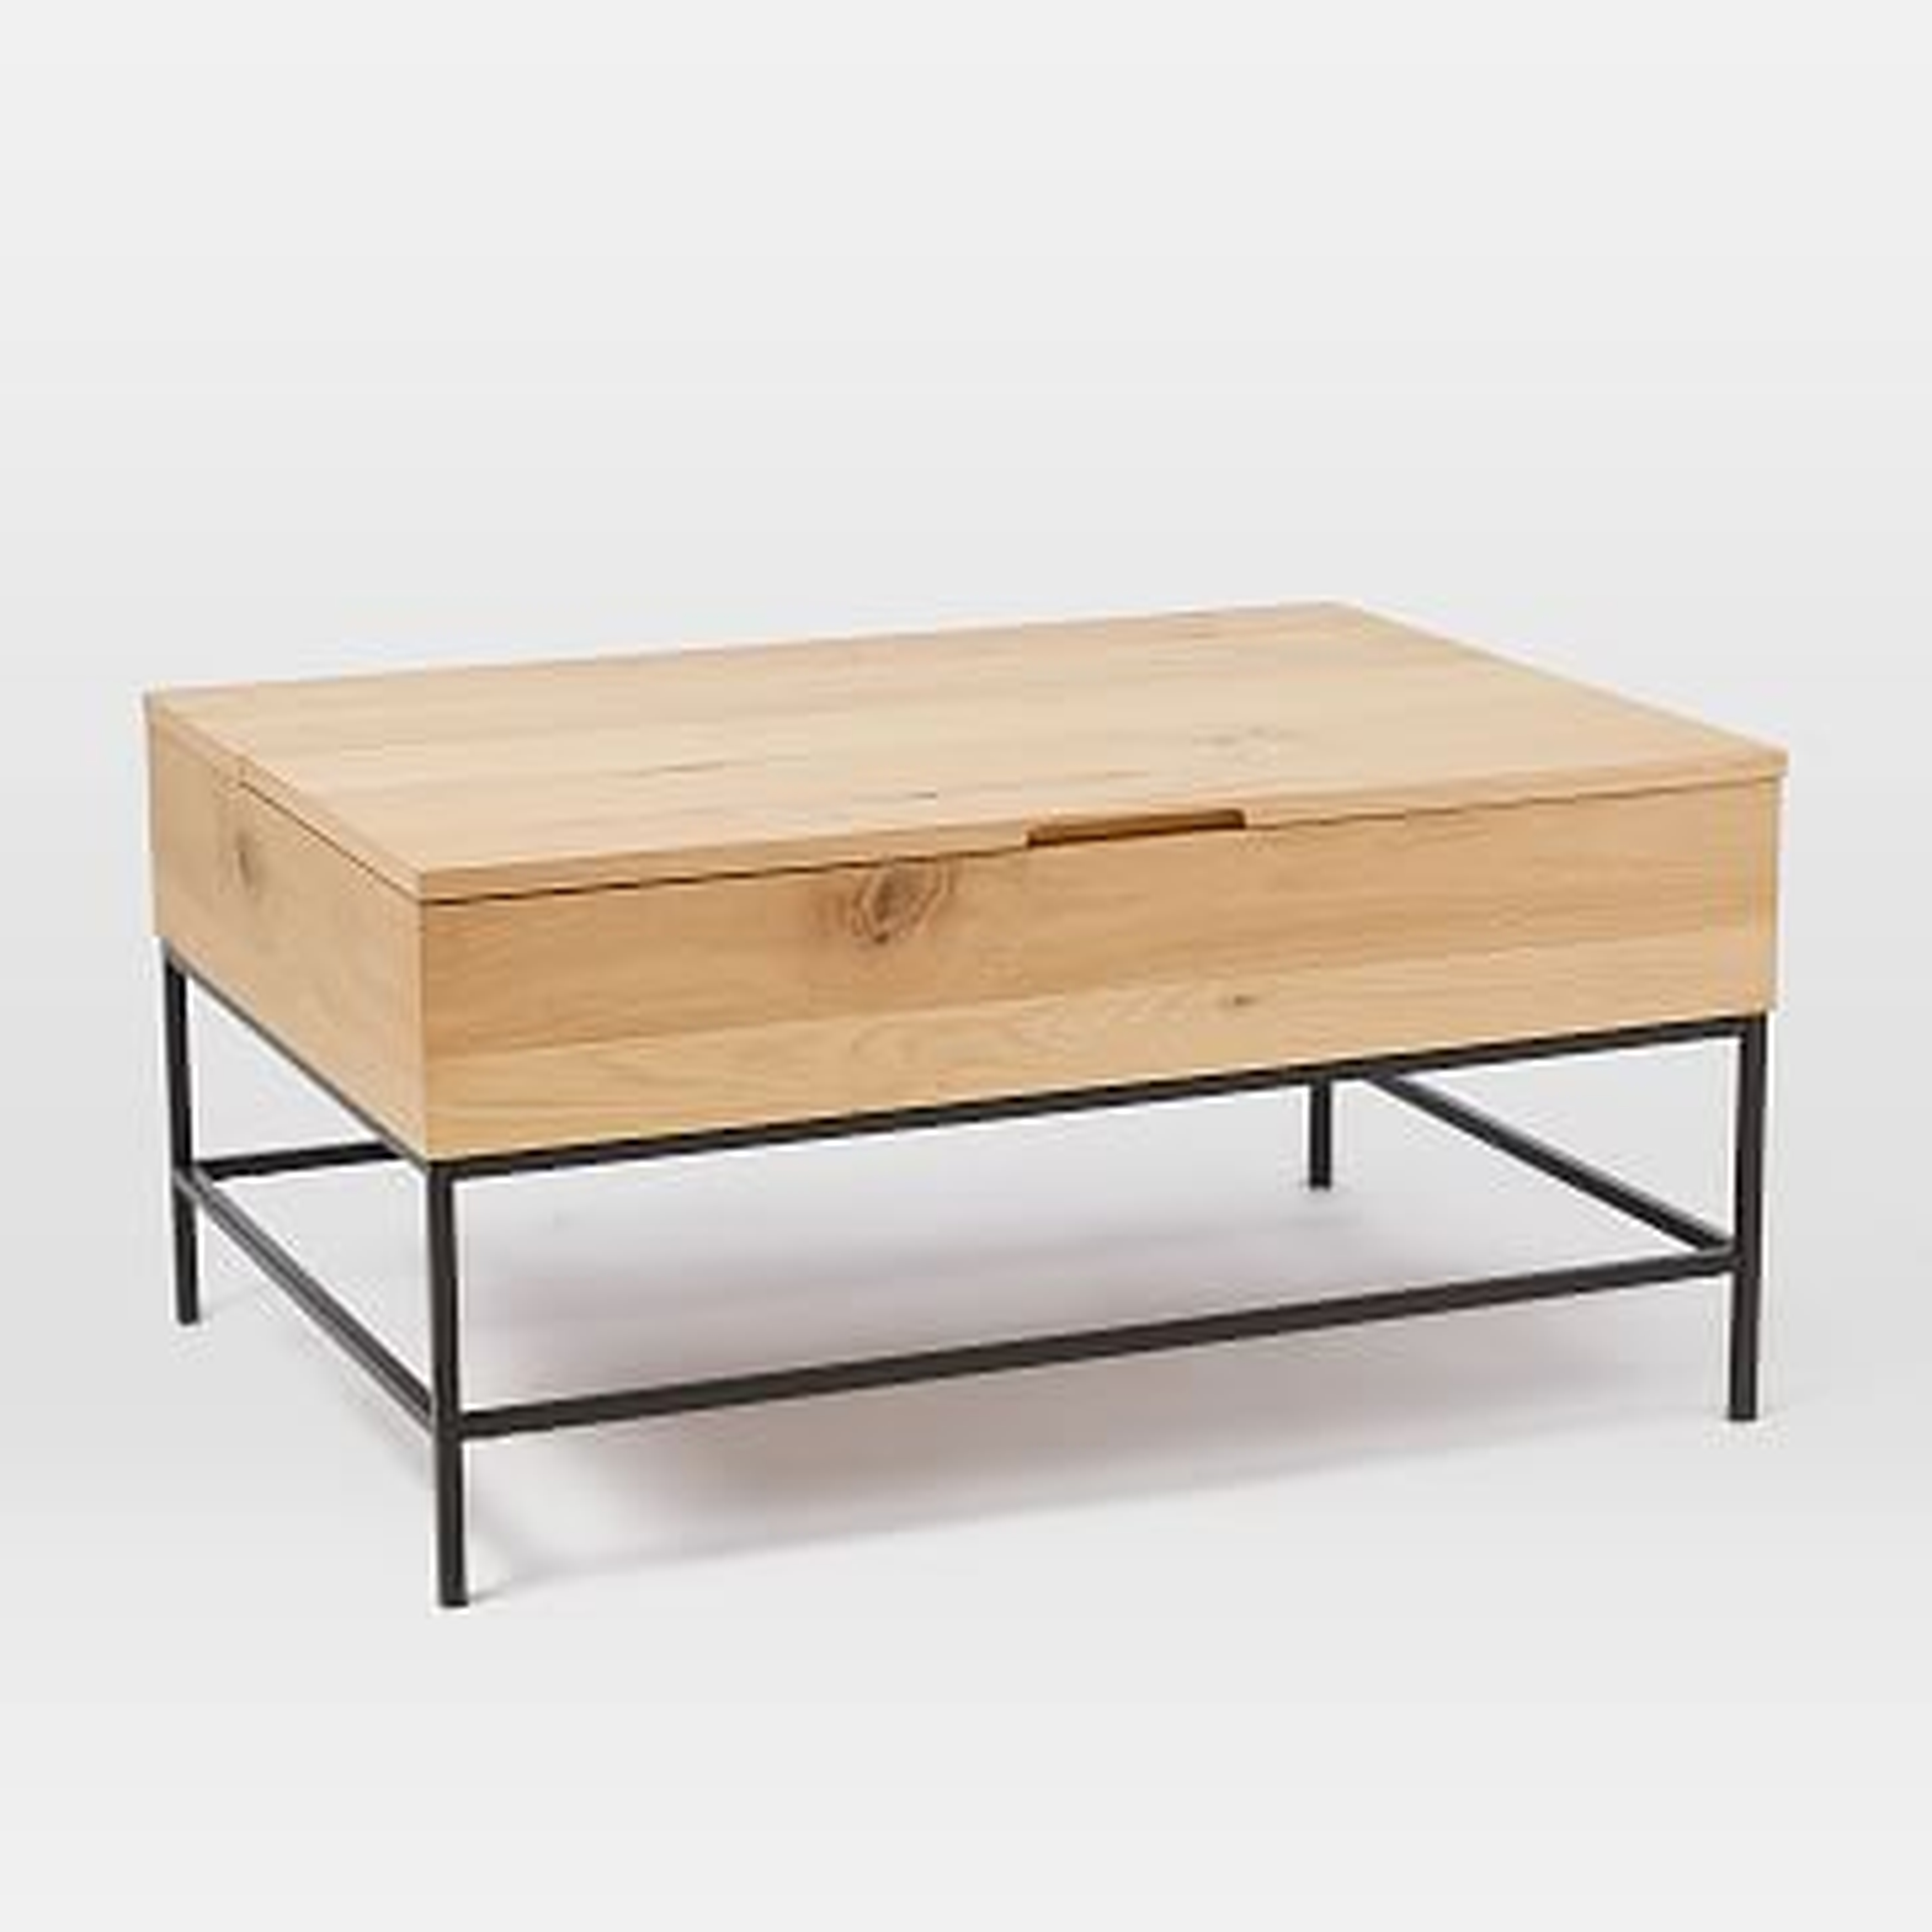 Industrial Storage Coffee Table - Small, Natural Oak - West Elm